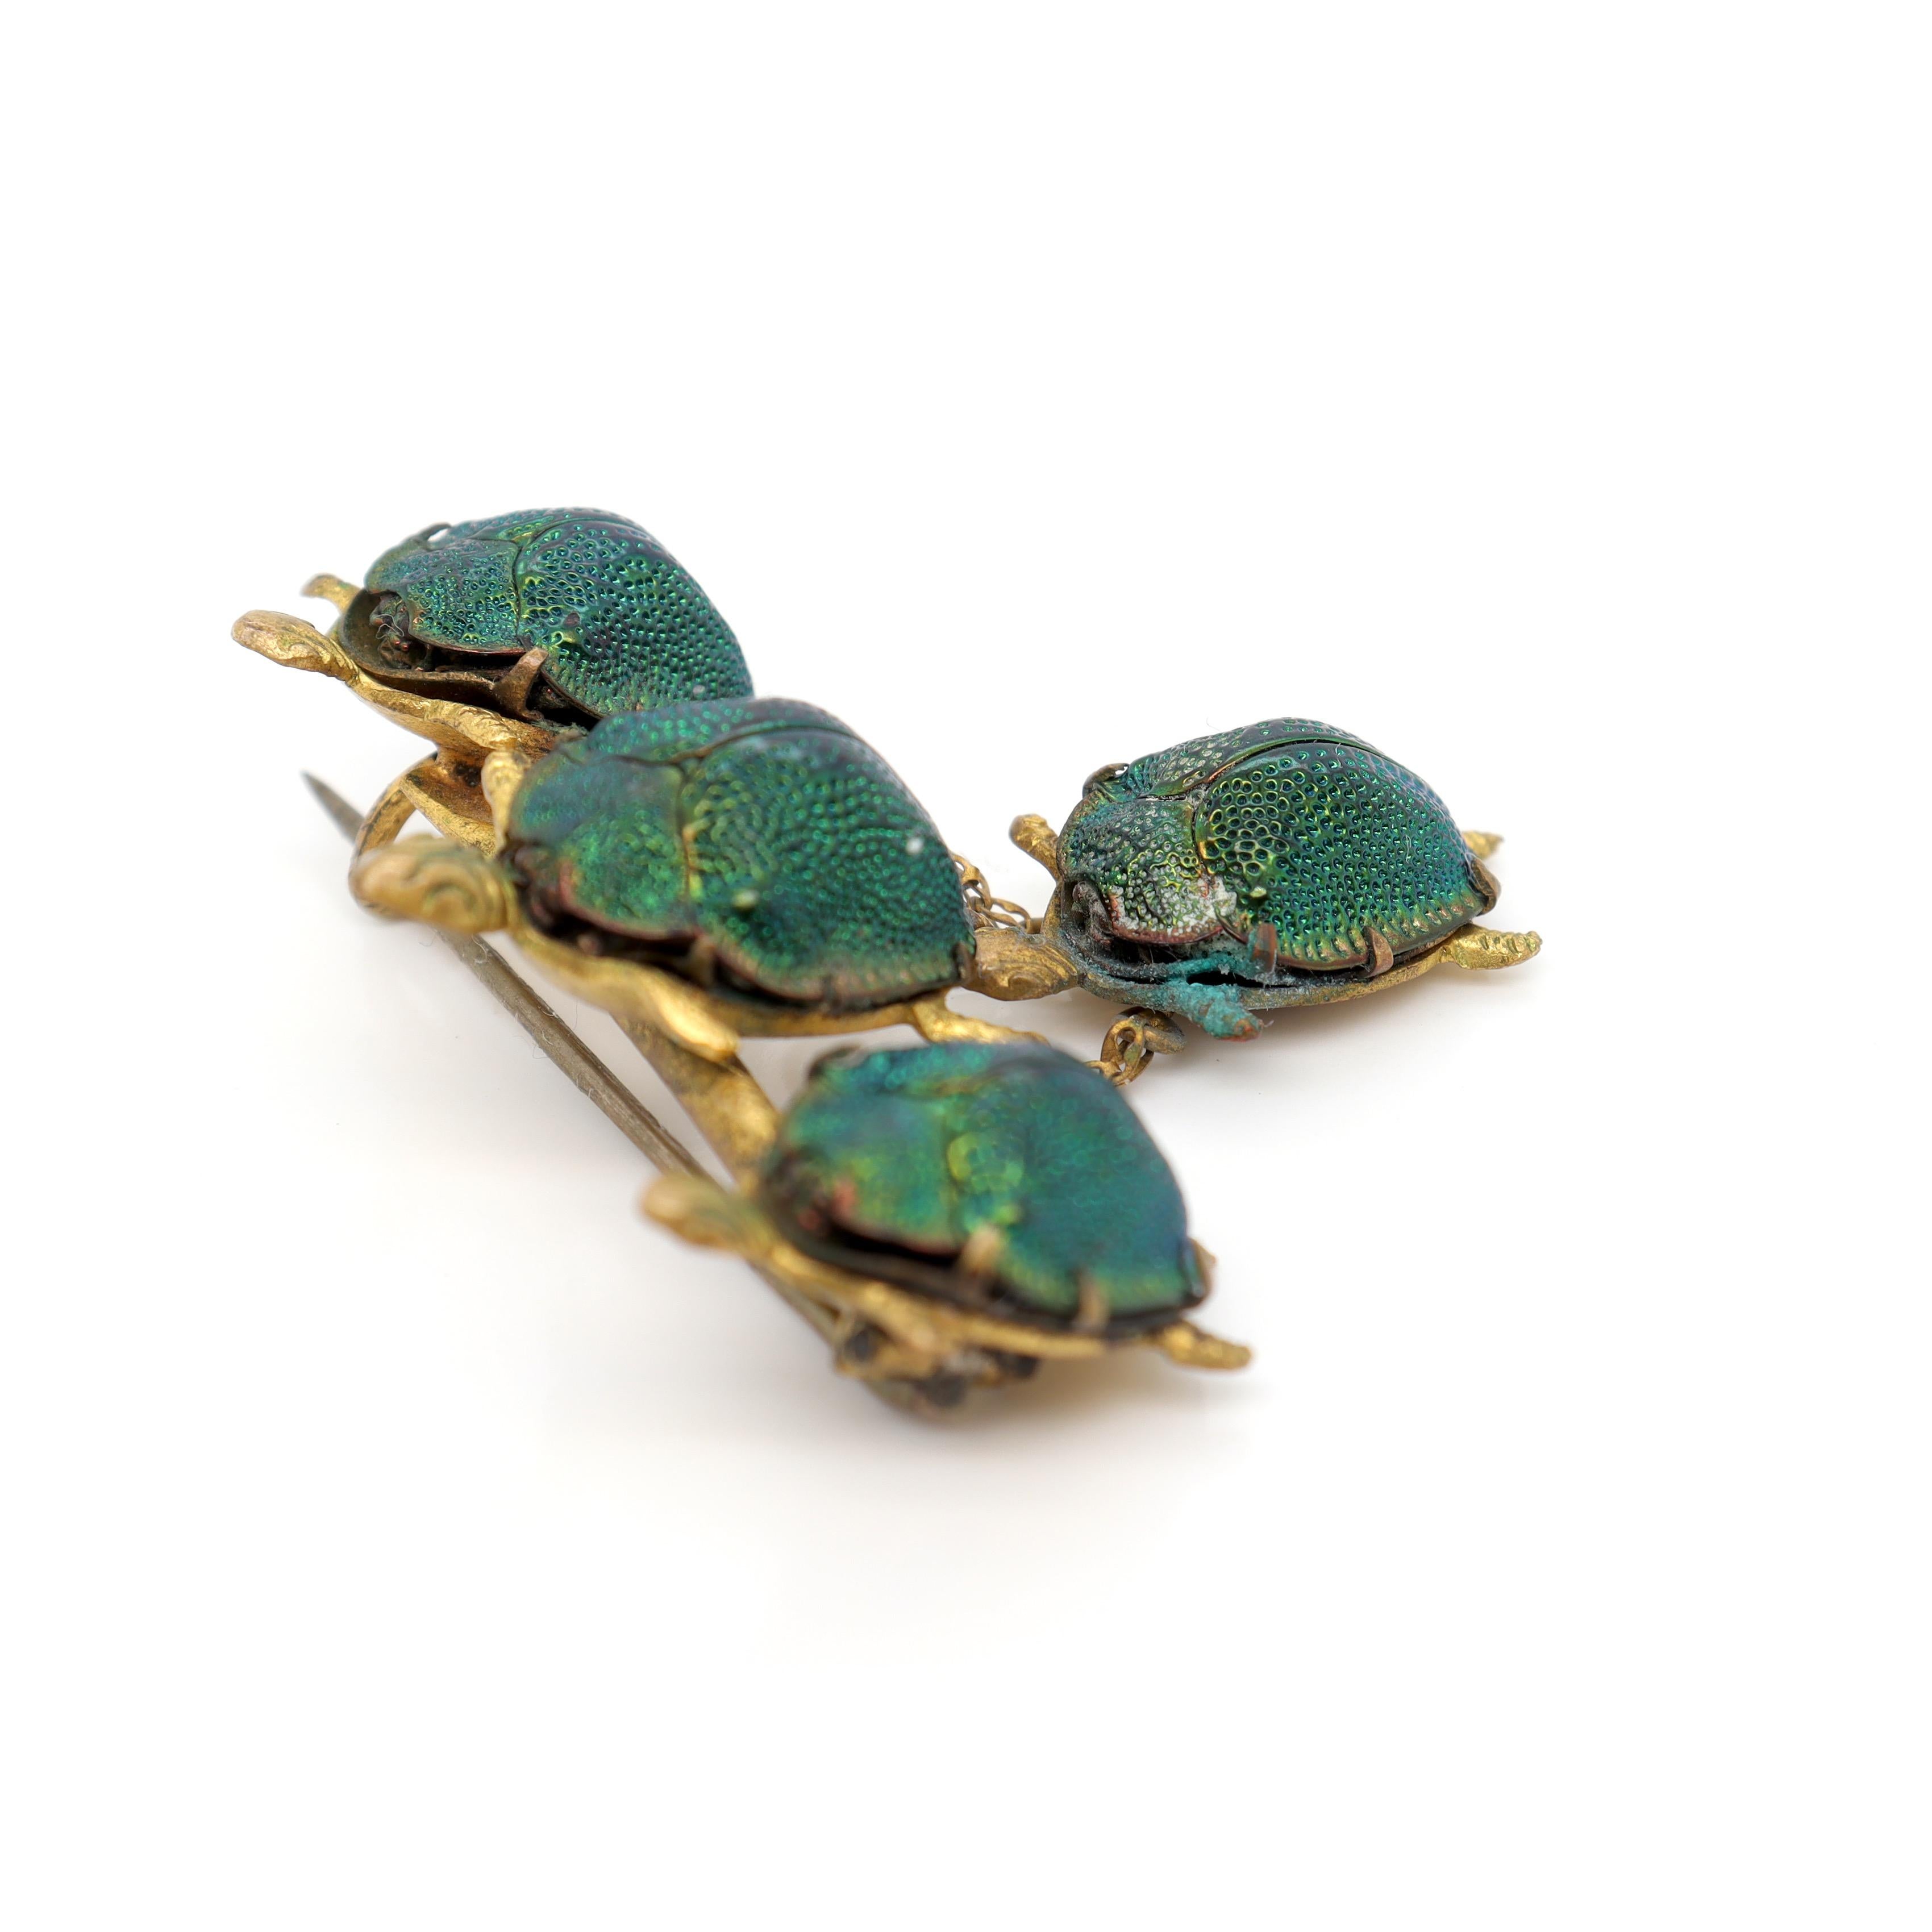 Antique Victorian Gold Filled Turtles Brooch with Egyptian Scarab Shells For Sale 8